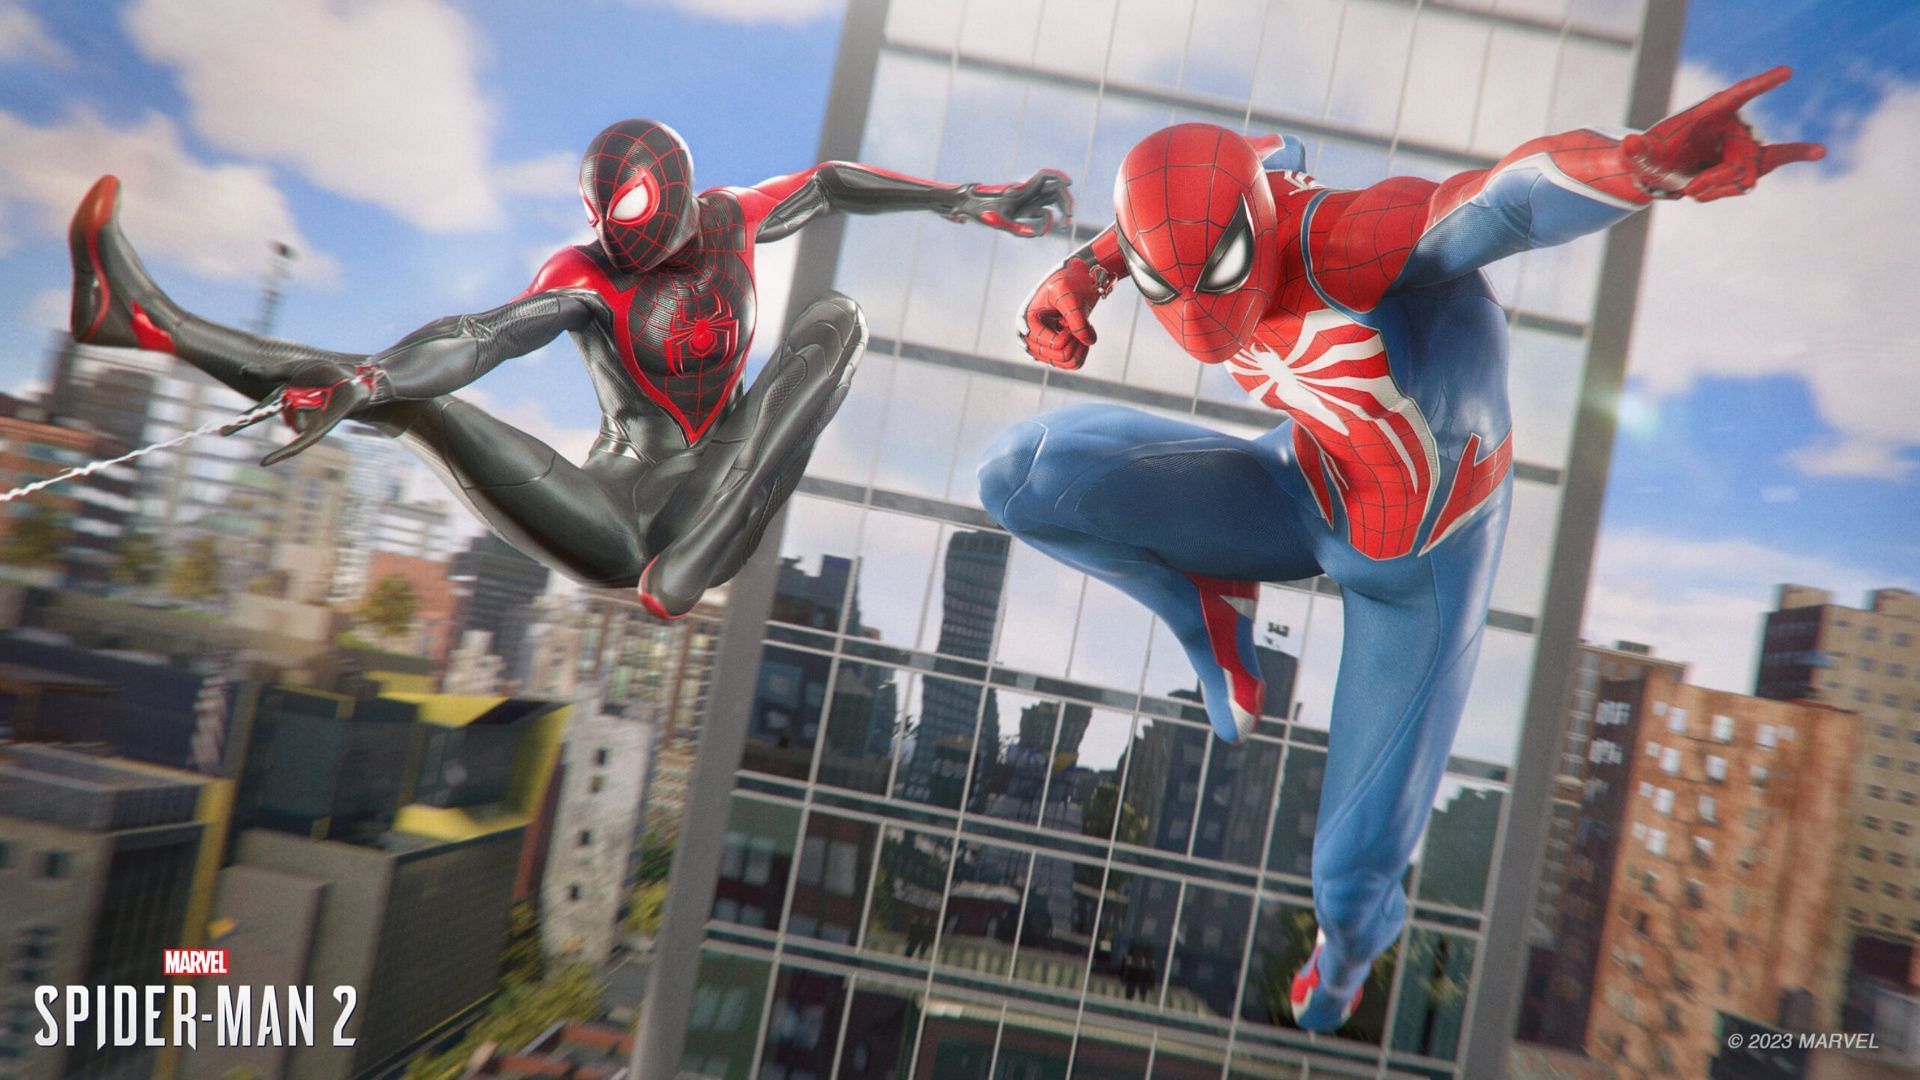 Is Marvel's Spider-Man 2 coming to PlayStation 4?